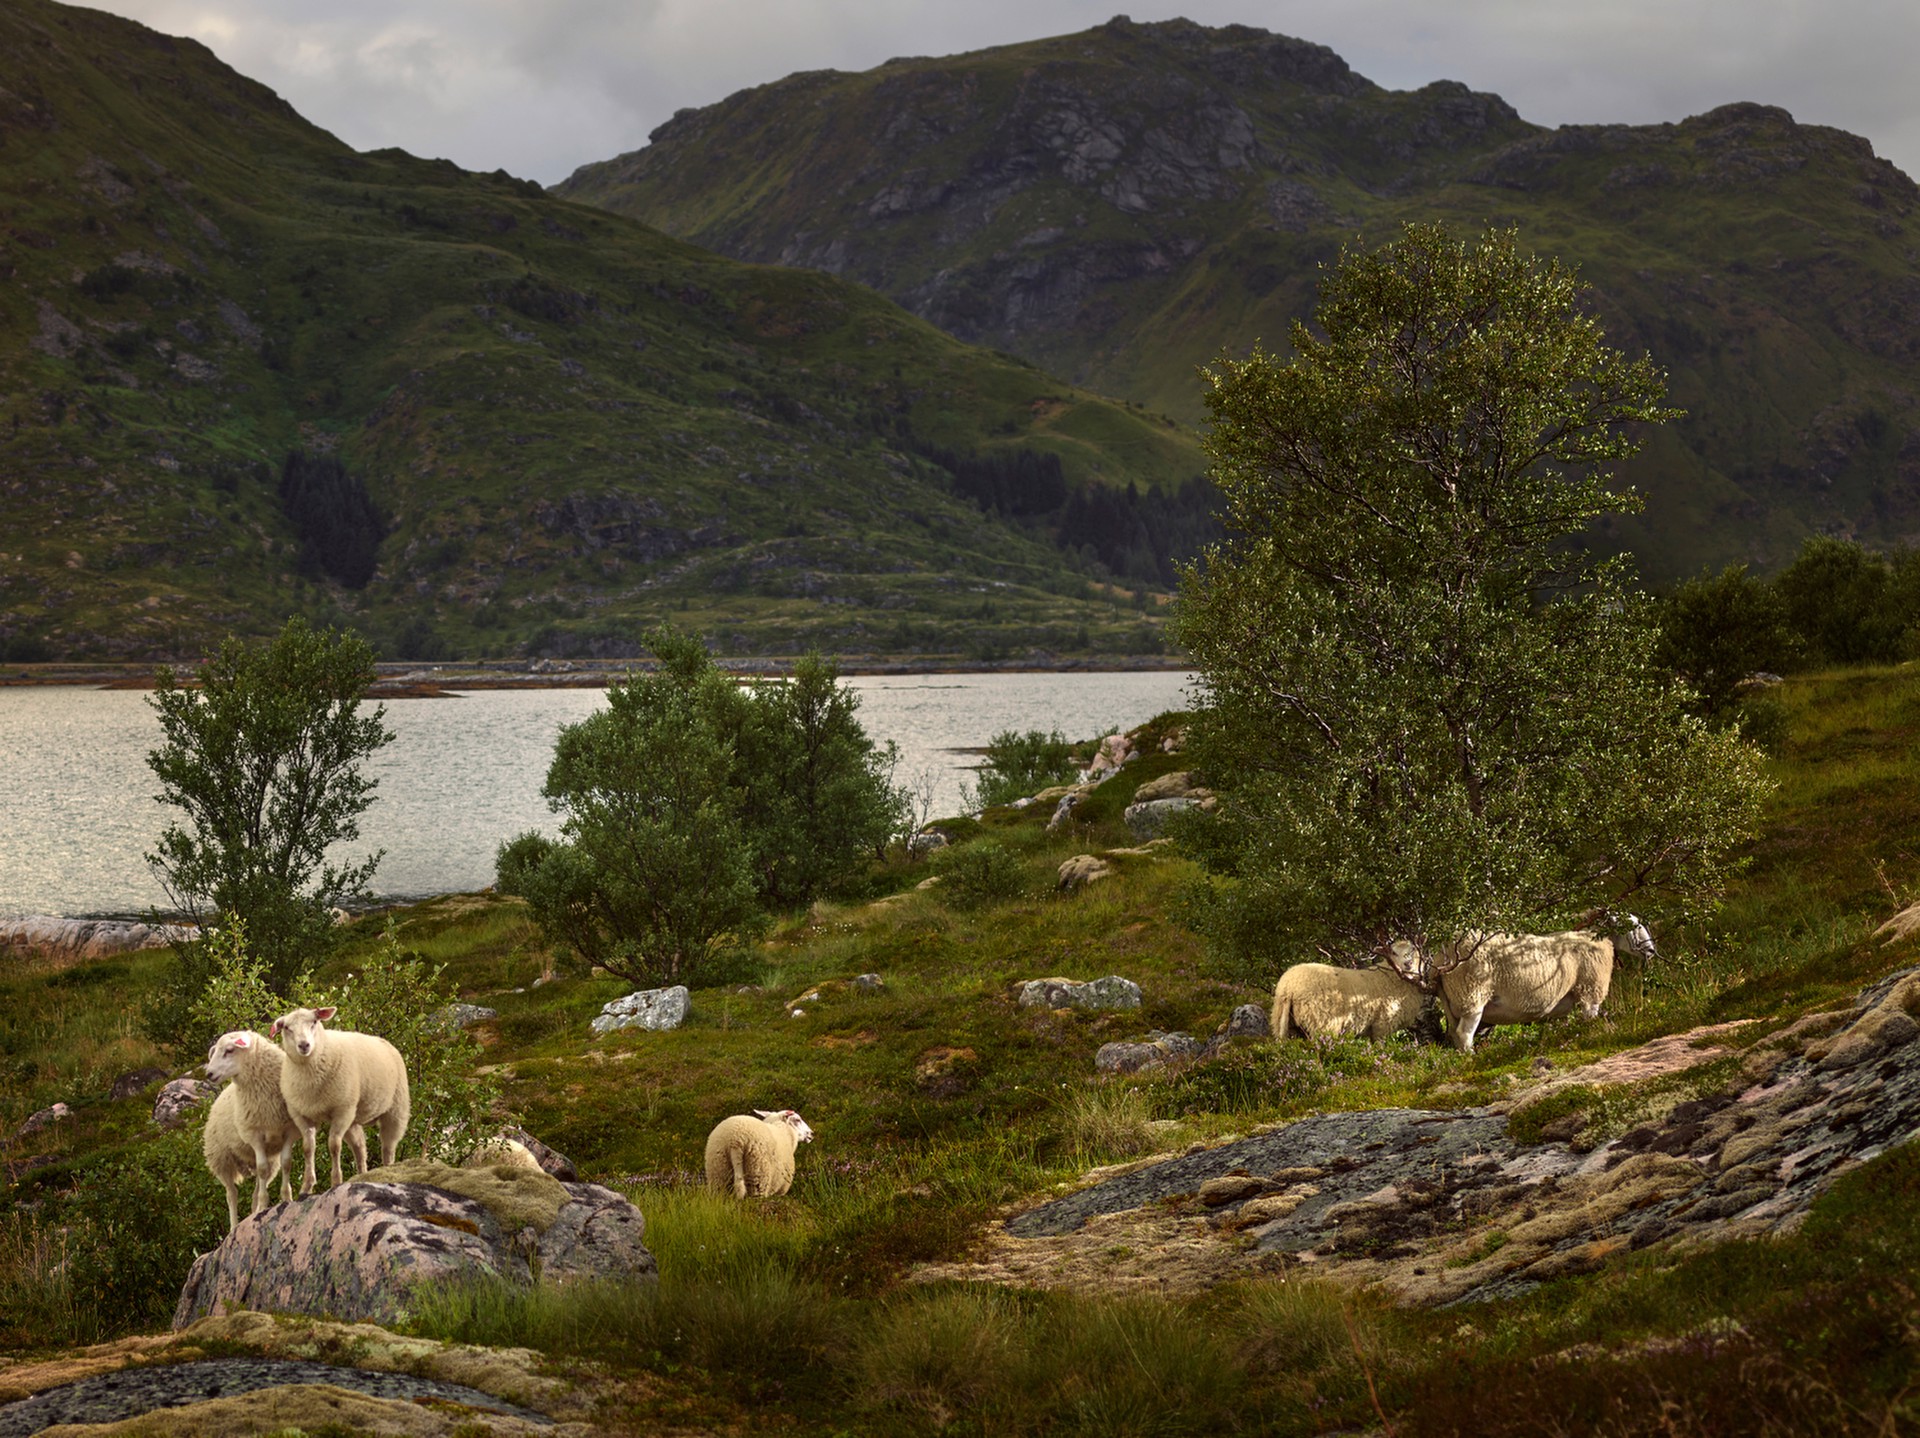 Pastoral Study with Sheep, Valberg, Norway by R. J. Kern